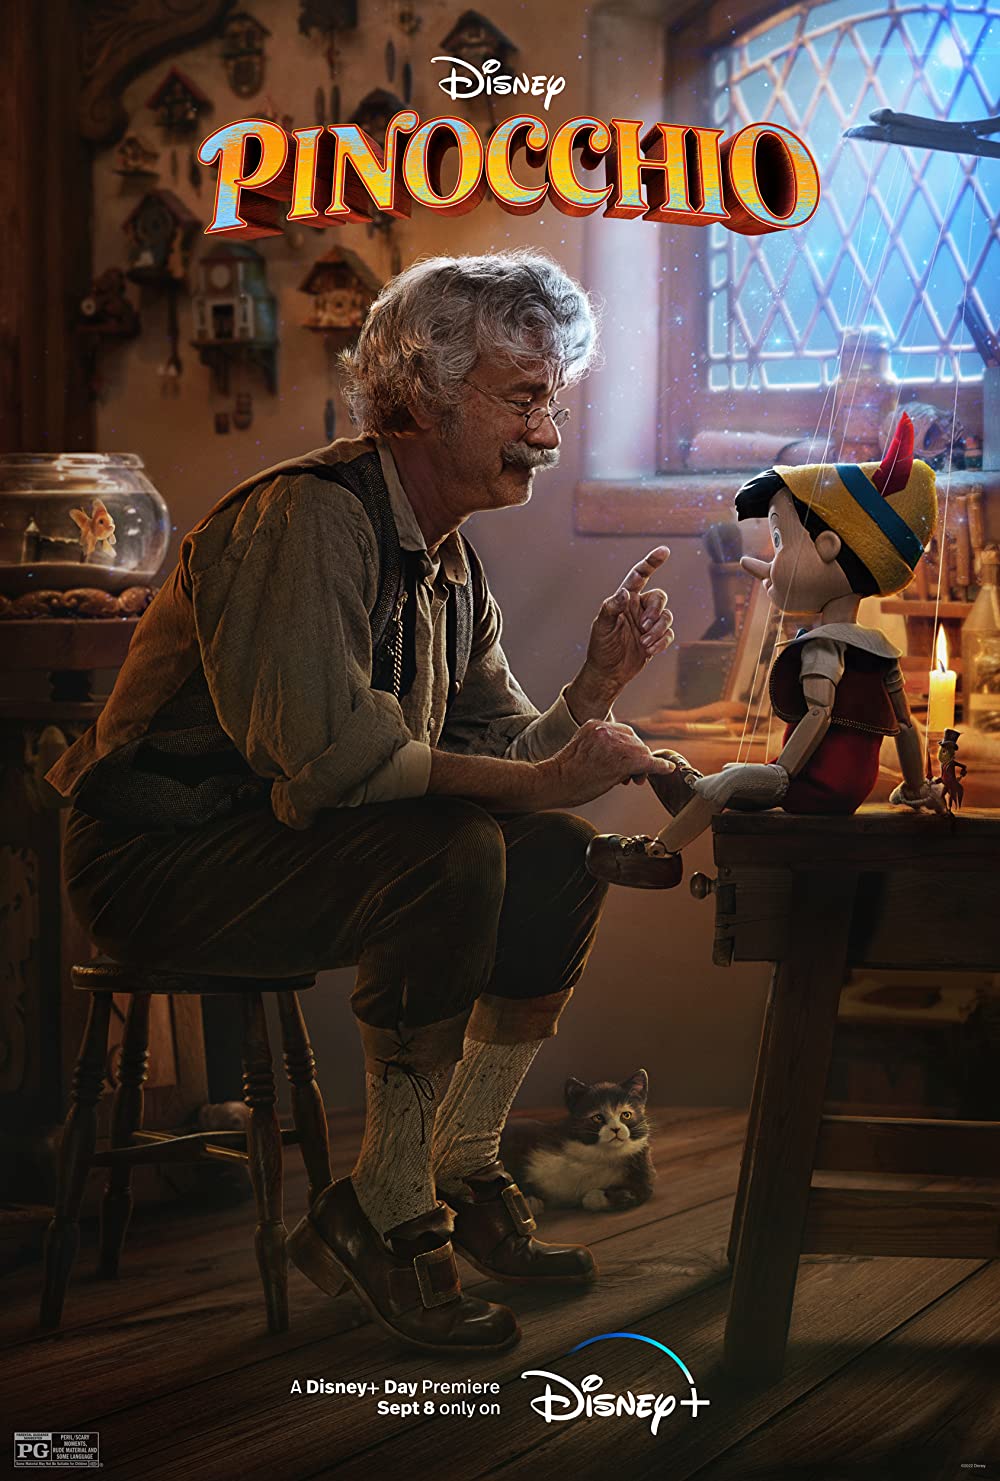 Pinocchio Movie (2022) Cast & Crew, Release Date, Story, Review, Poster, Trailer, Budget, Collection
